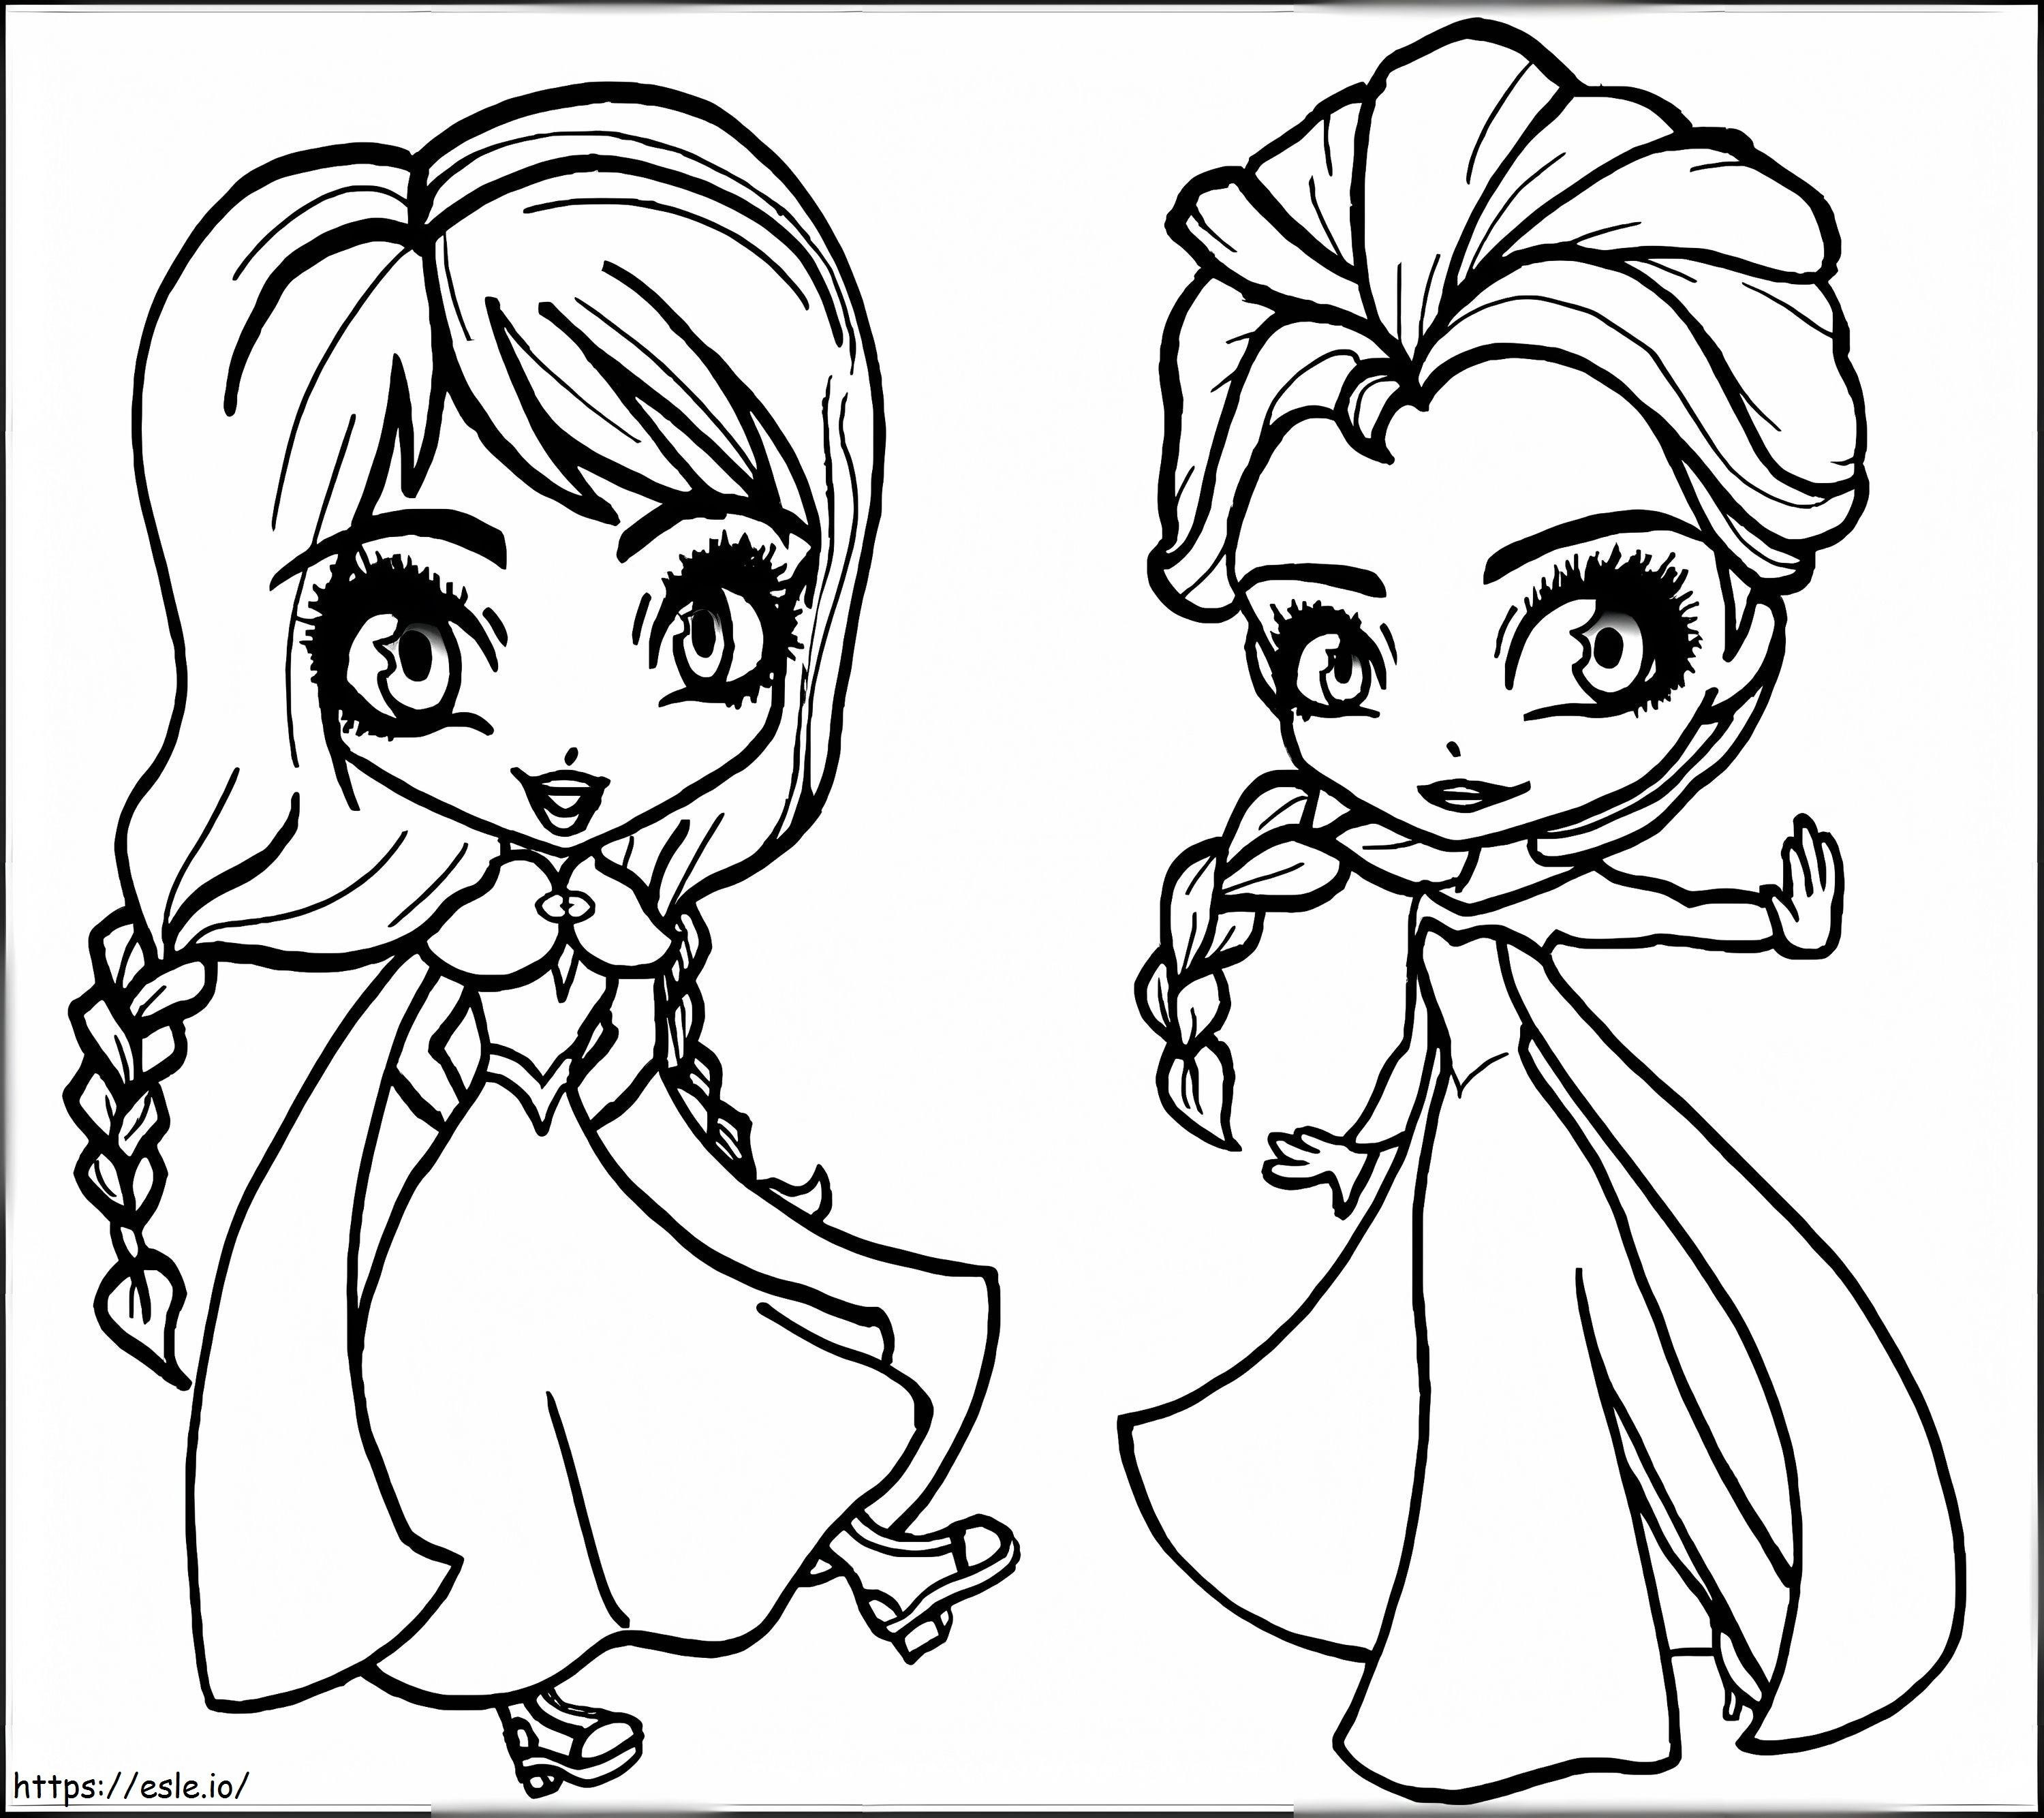 Anna And Elsa Chibi coloring page